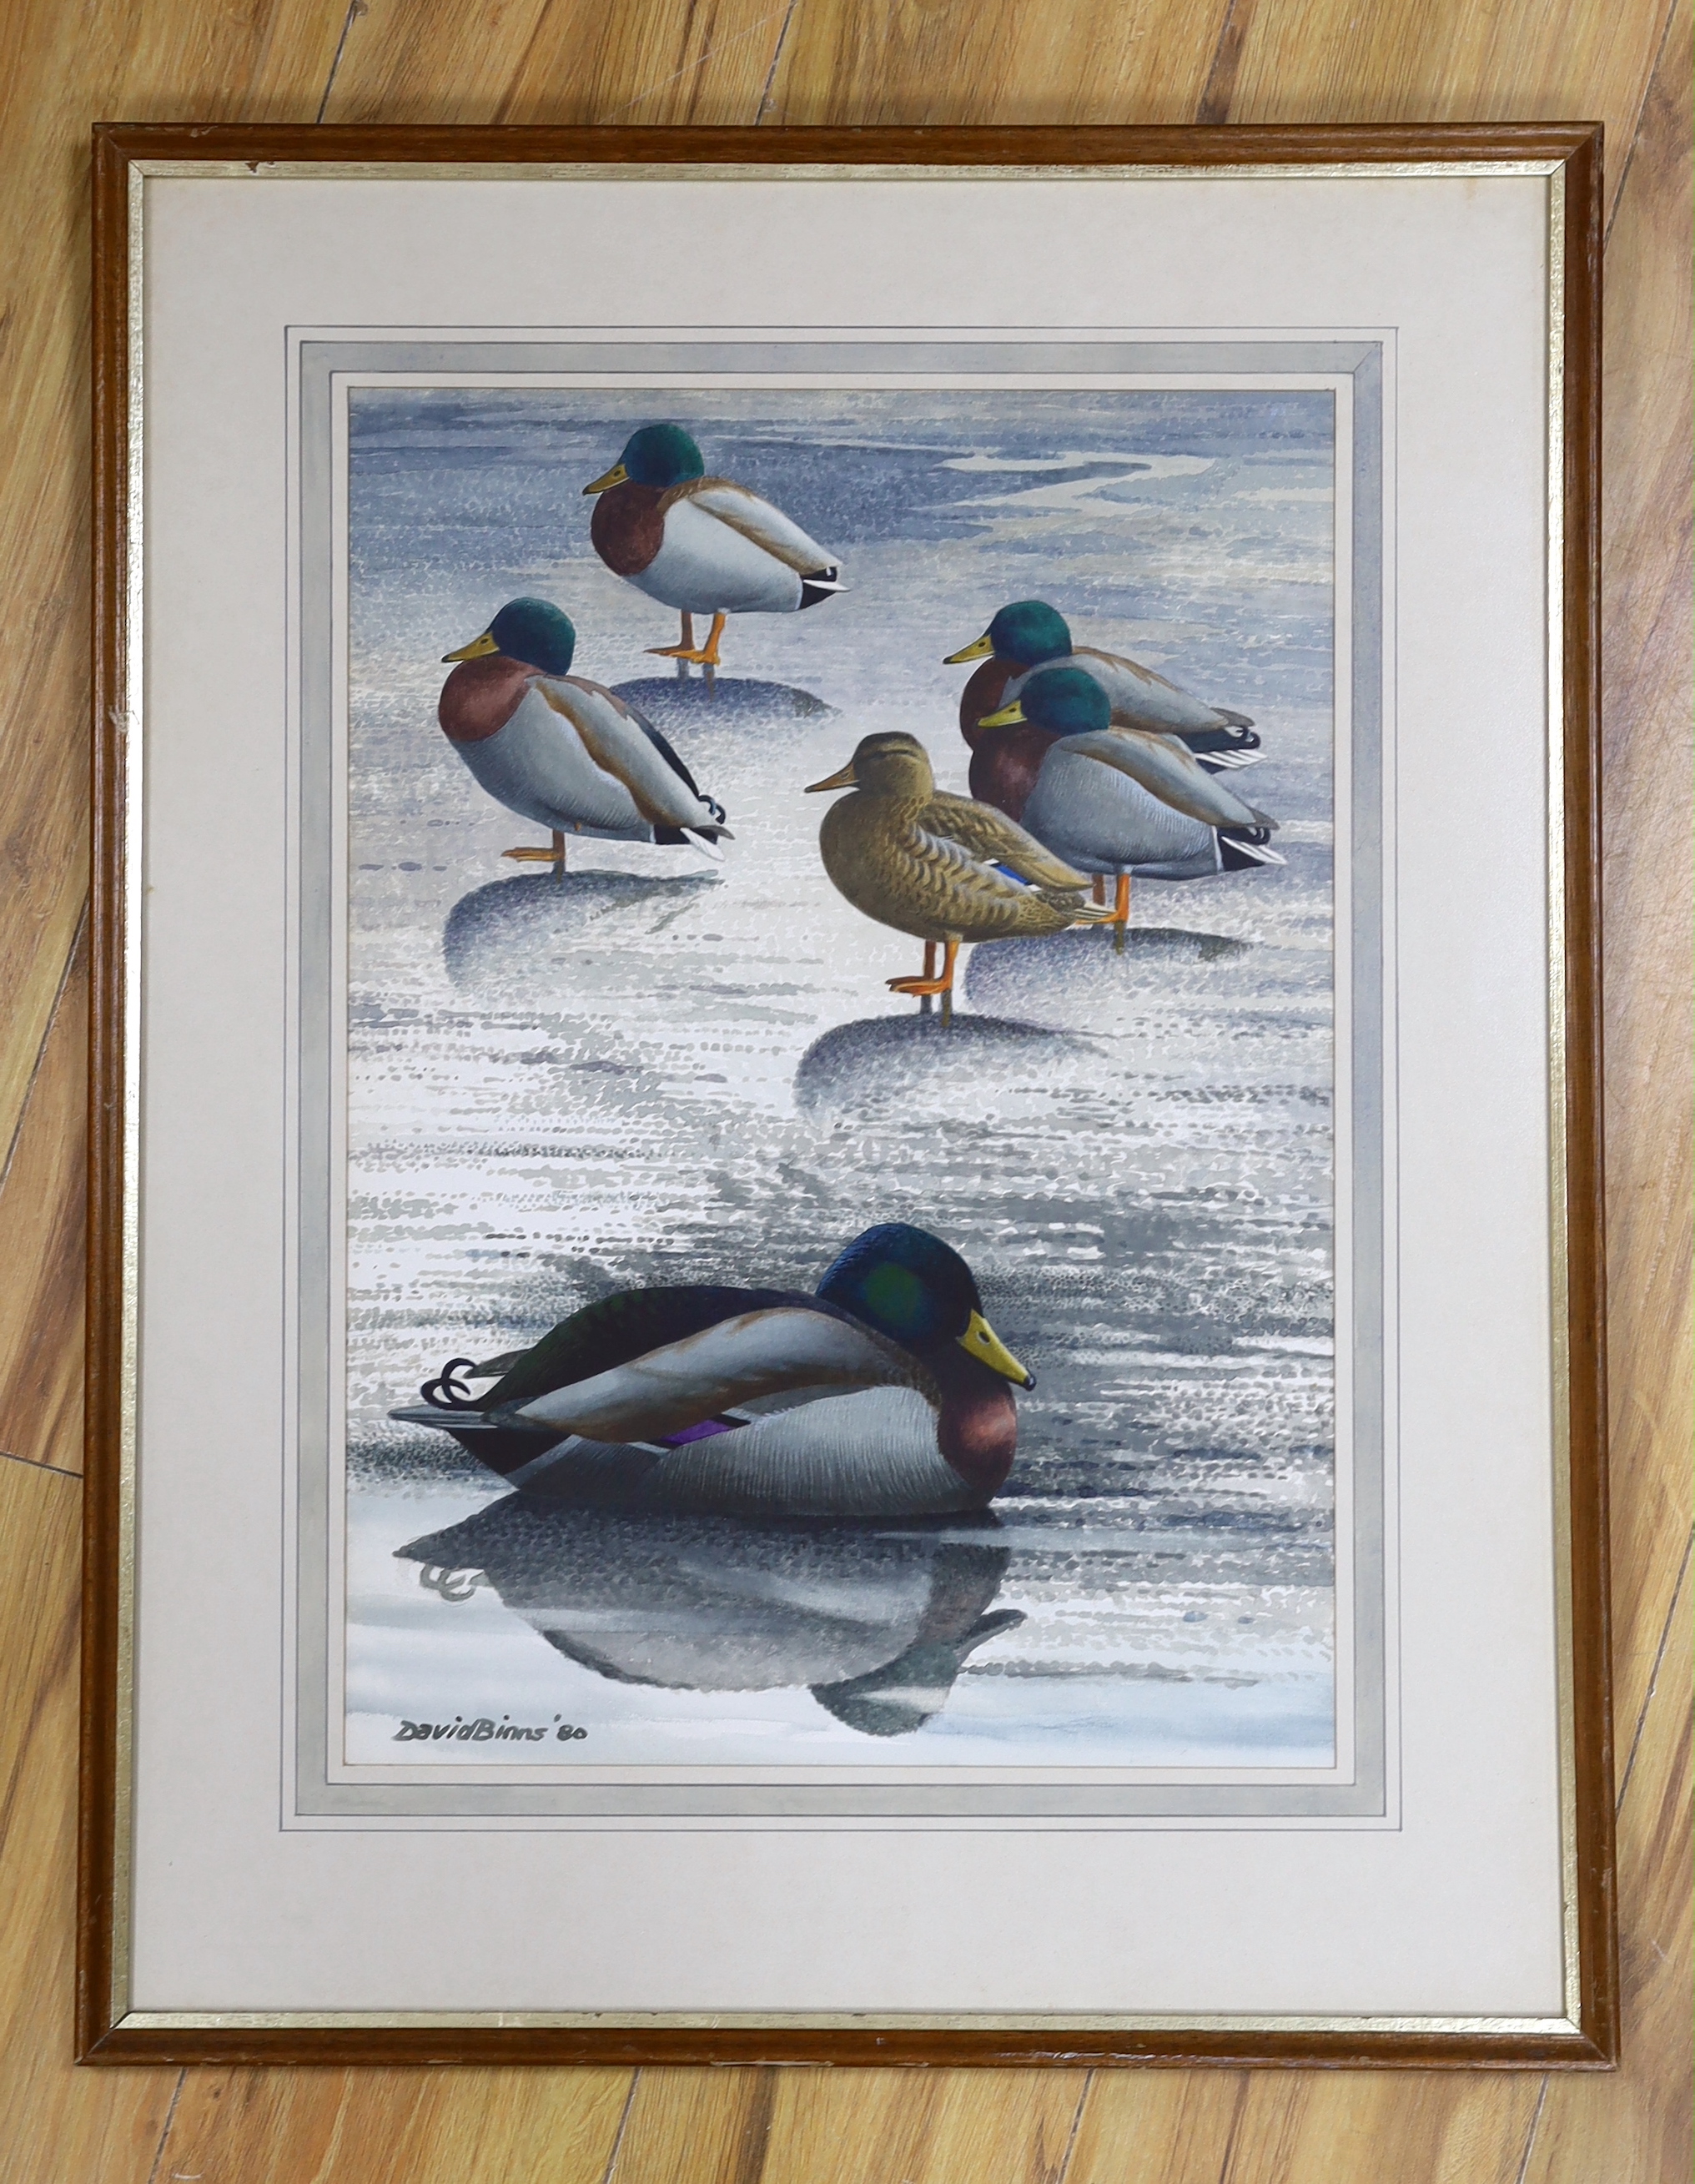 David Binns (1935-2020) watercolour, 'Thawing out mallard', signed and dated '80, inscribed label verso, 50 x 36cm